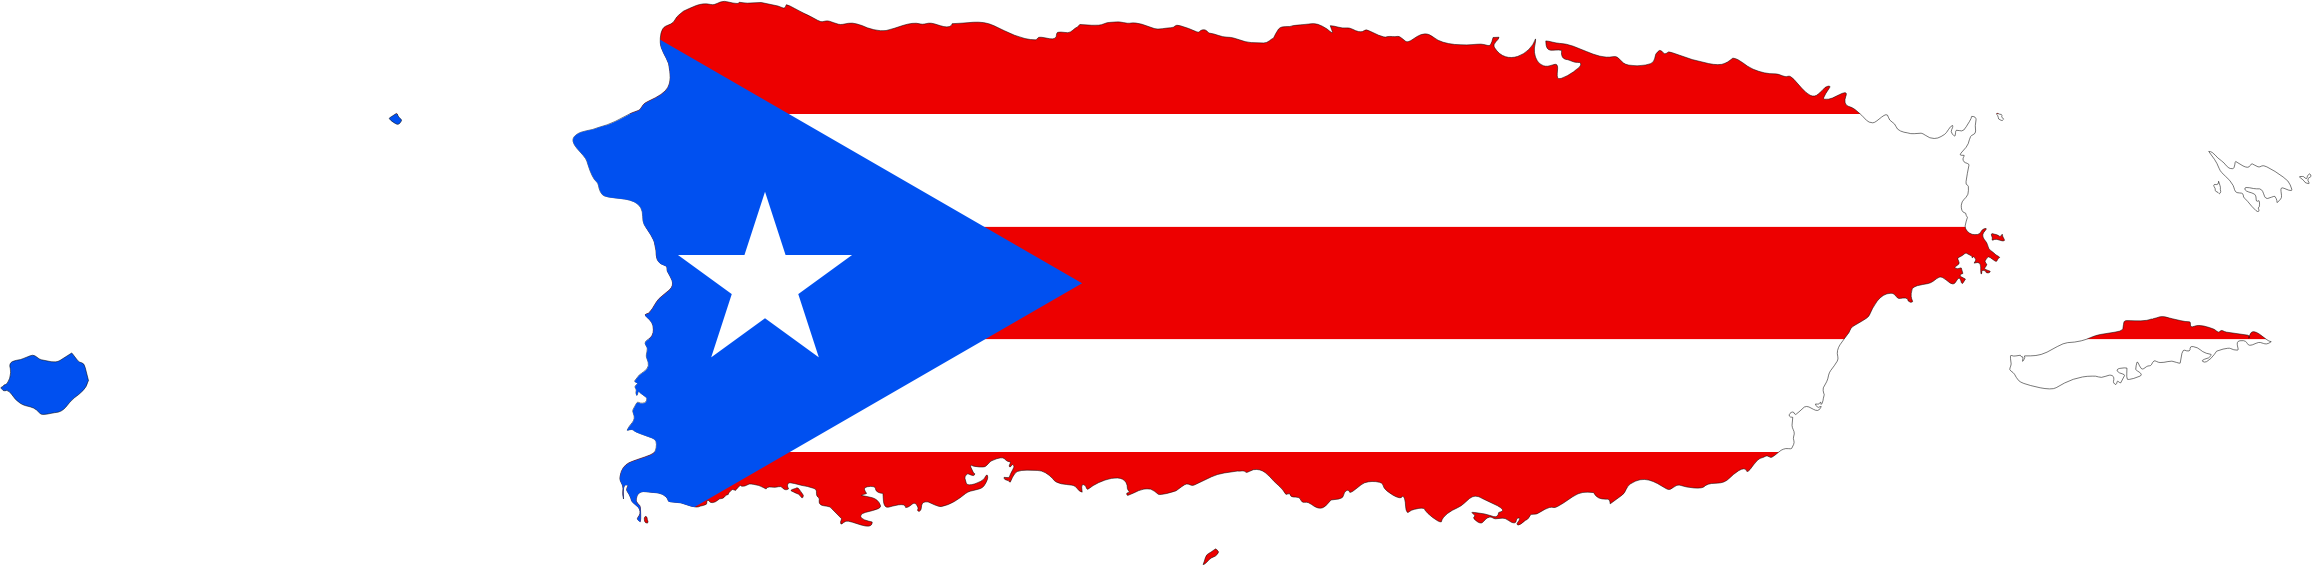 Download puerto rican map with flag inside clipart 20 free Cliparts ...